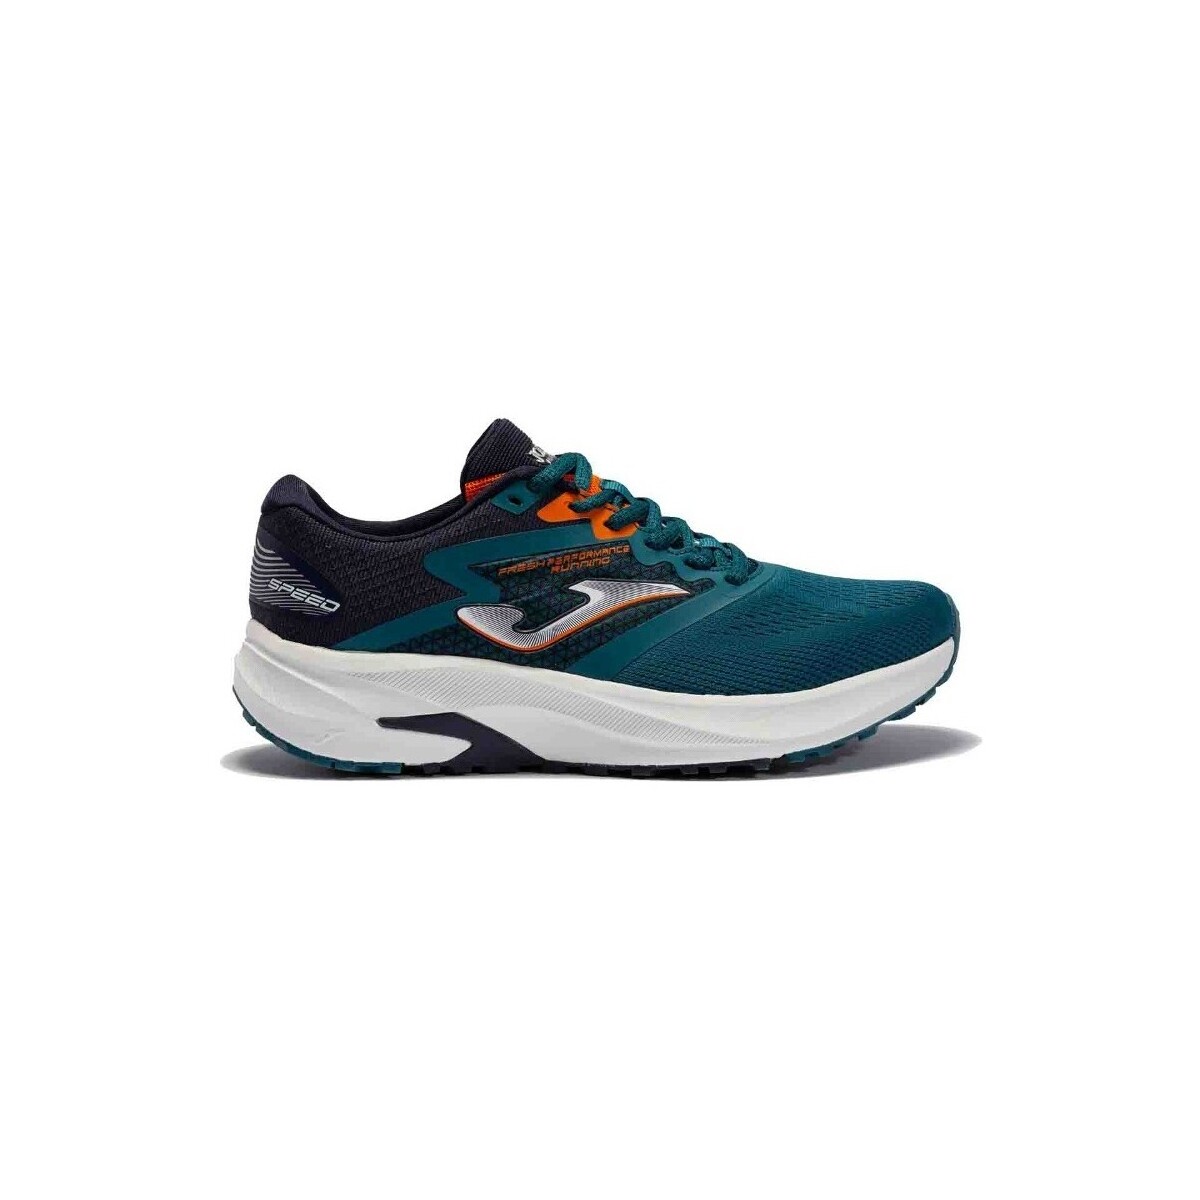 Zapatos Hombre Running / trail Joma RSPEEW2217 Azul